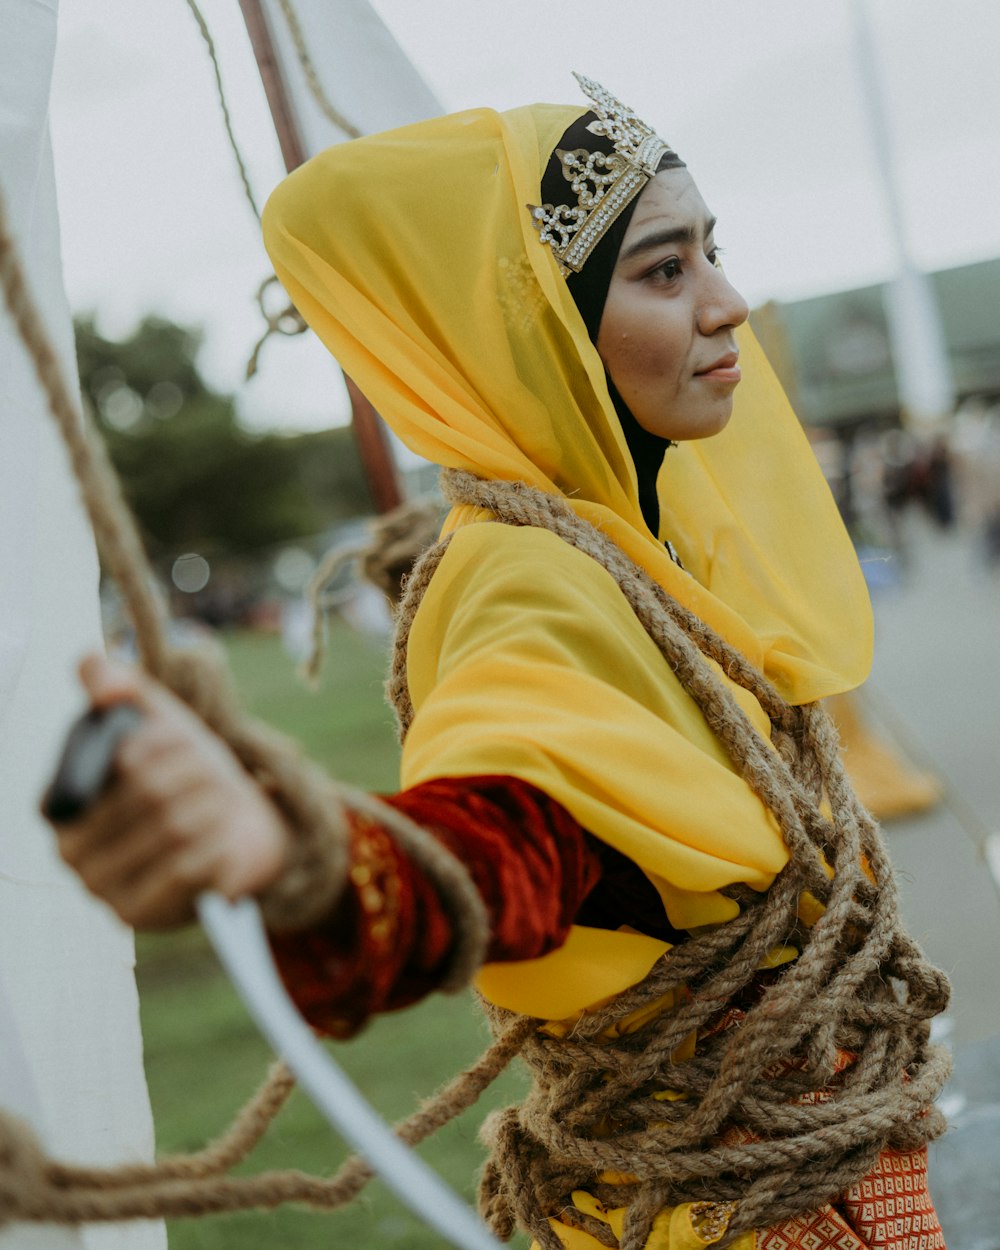 a woman dressed in a costume holding a sword